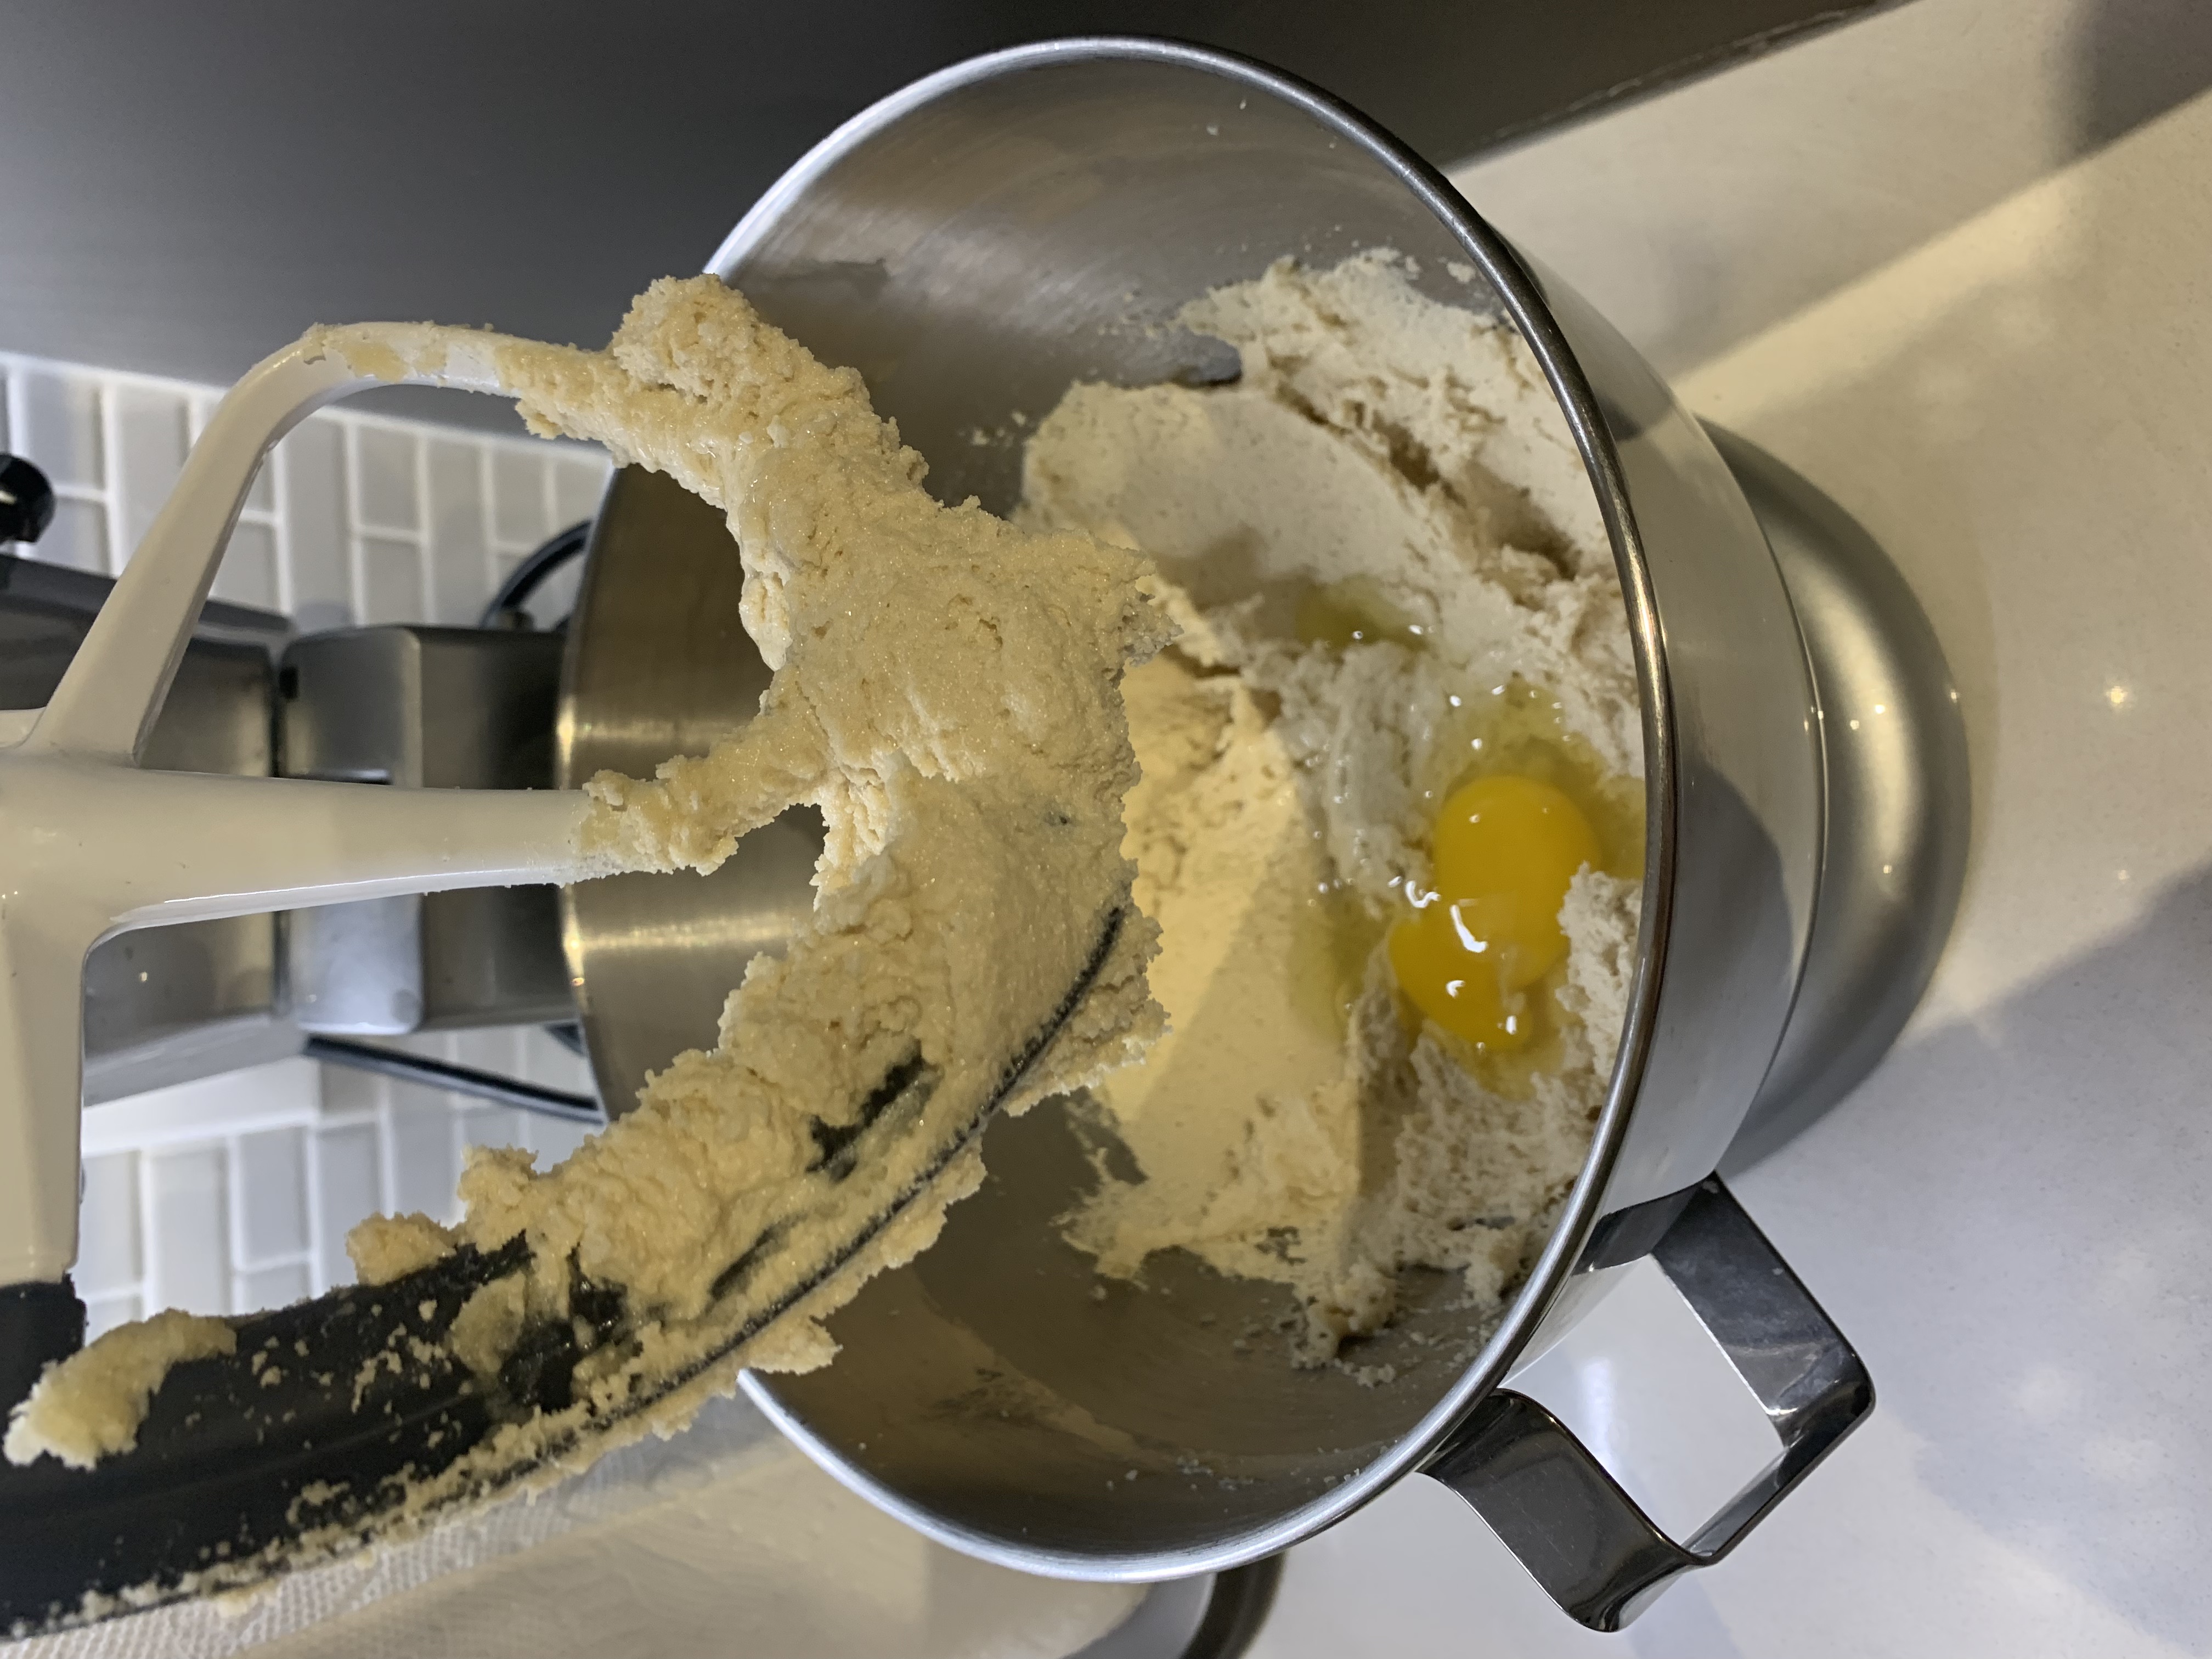 stand mixer with batter